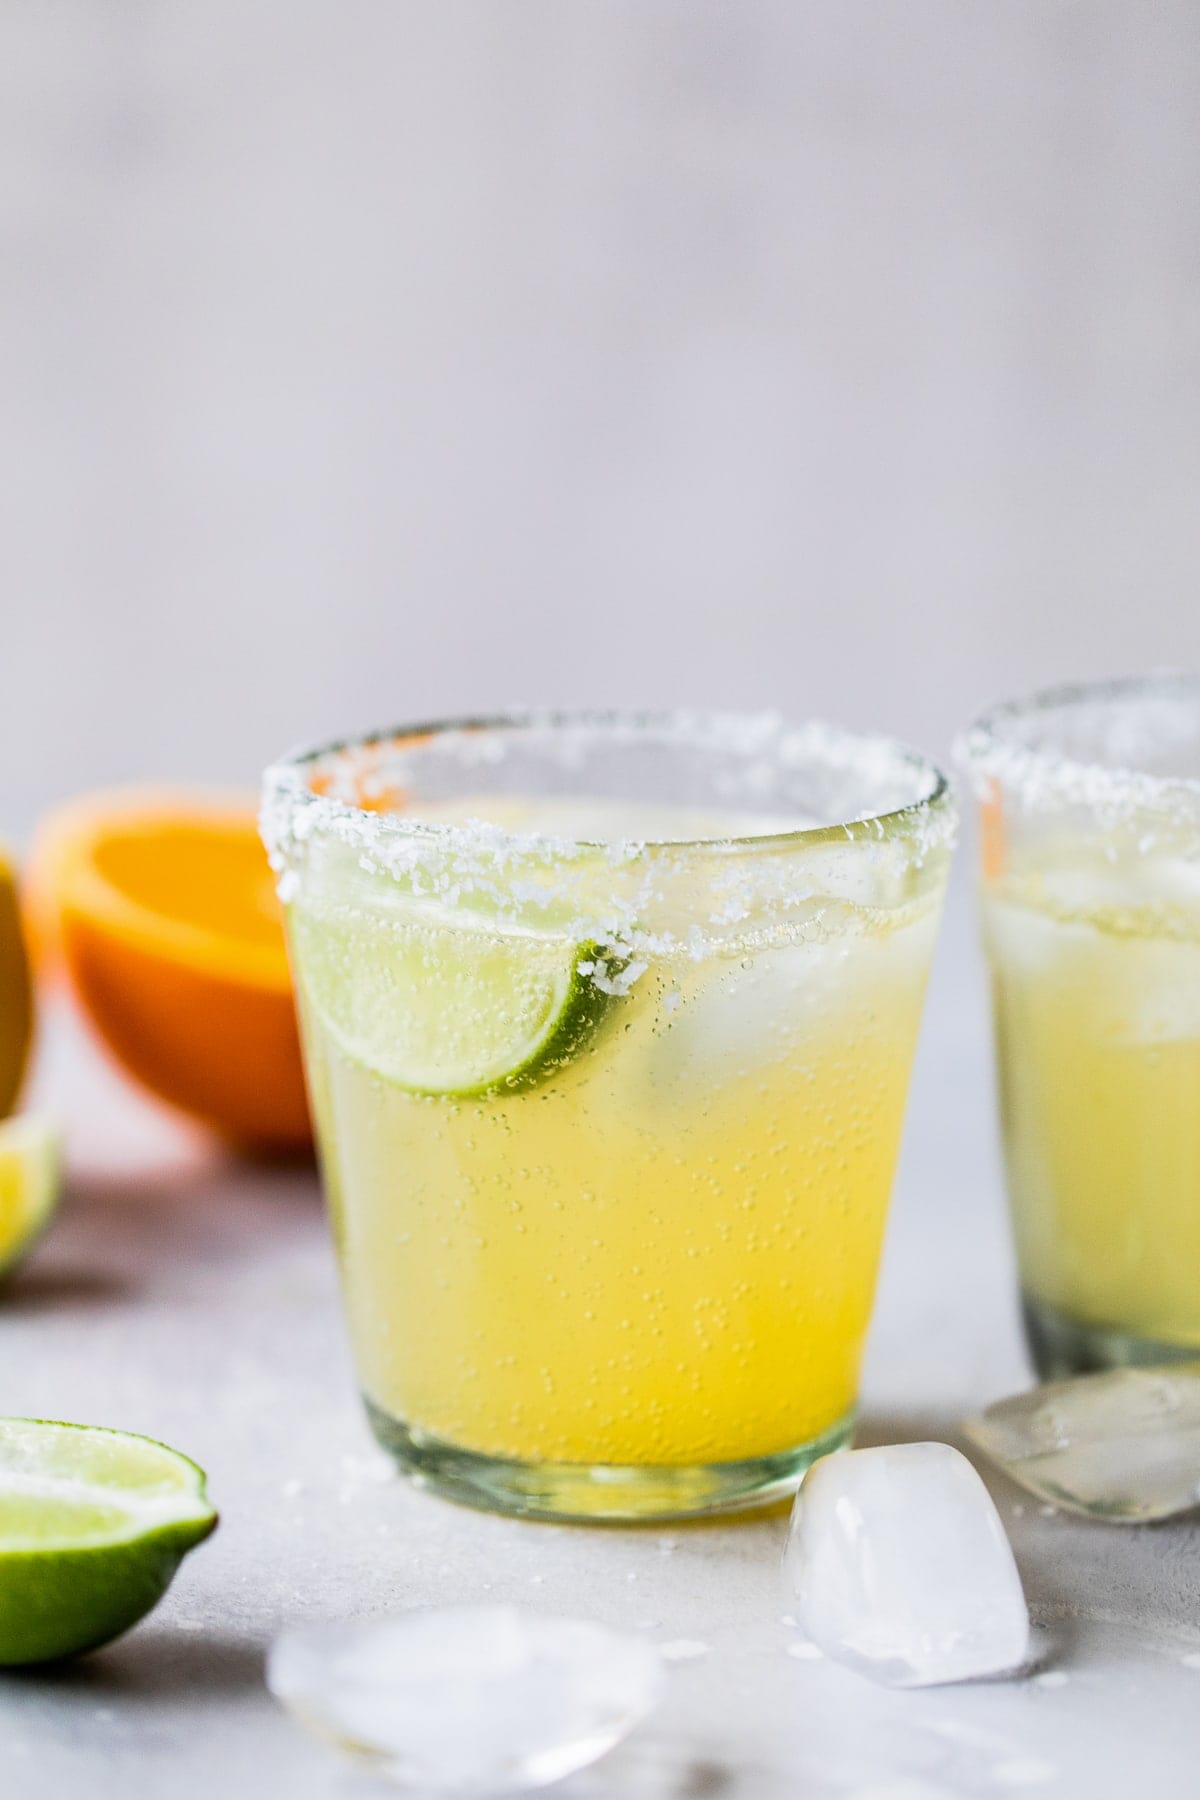 A classic non-alcoholic virgin margarita ready to be drank on a table.